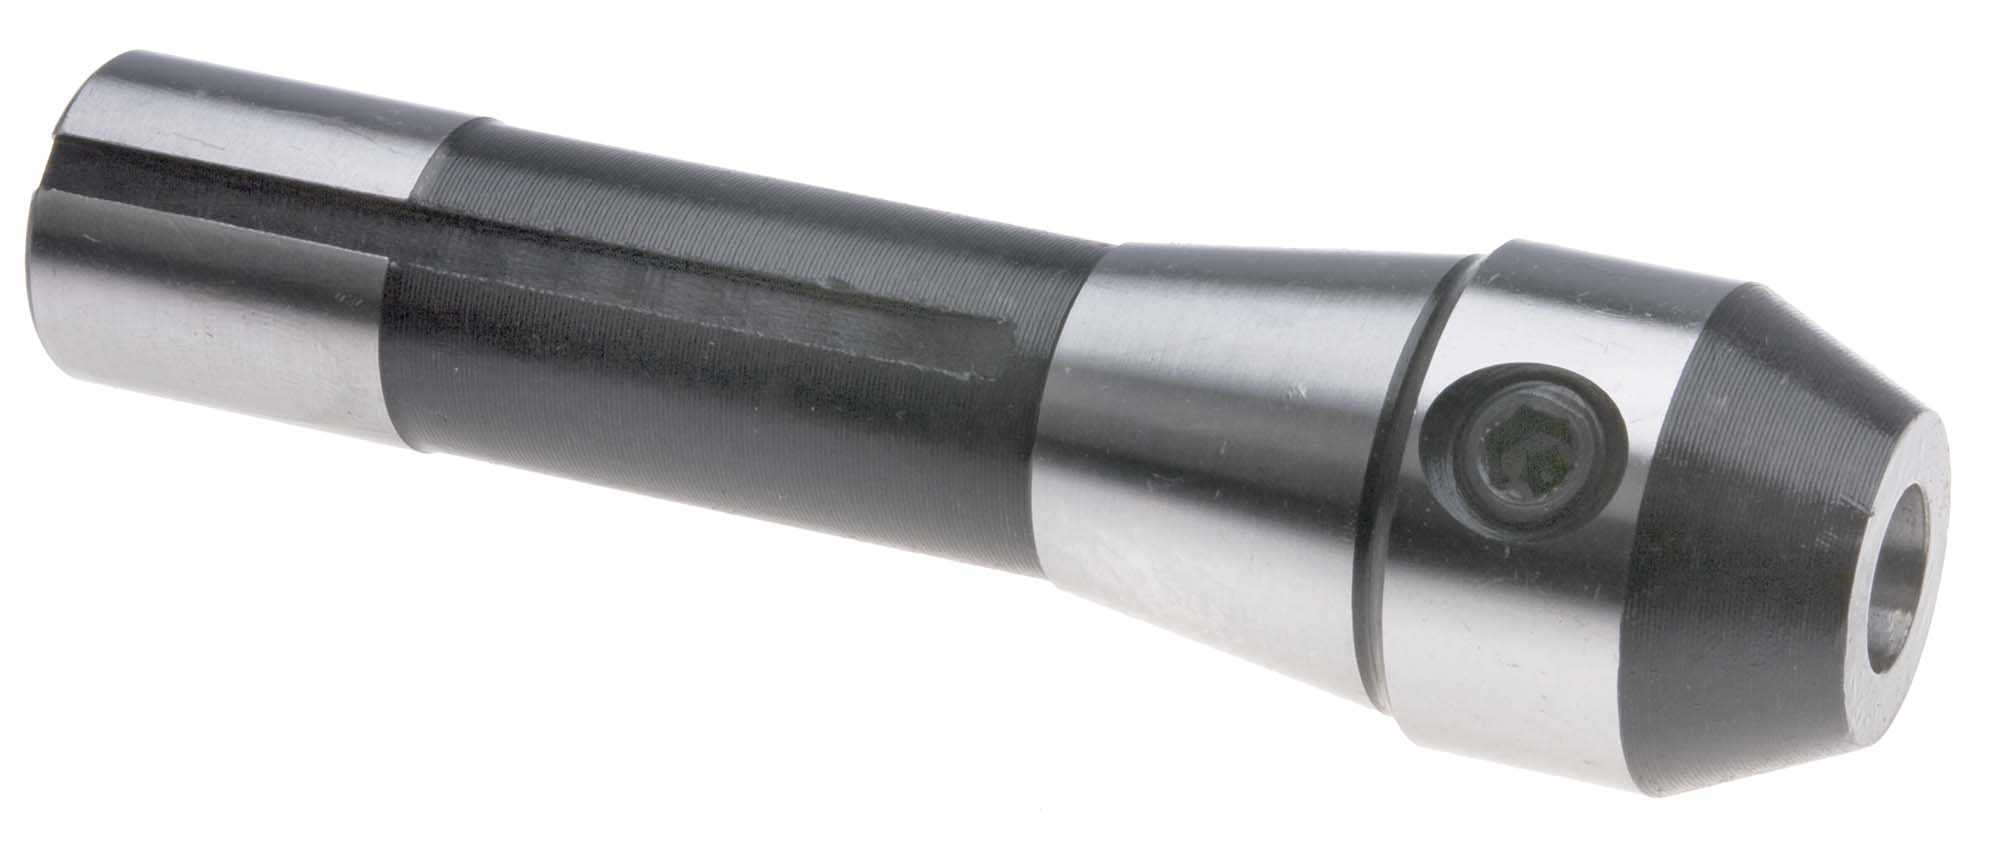 3/8" R8 End Mill Adapter